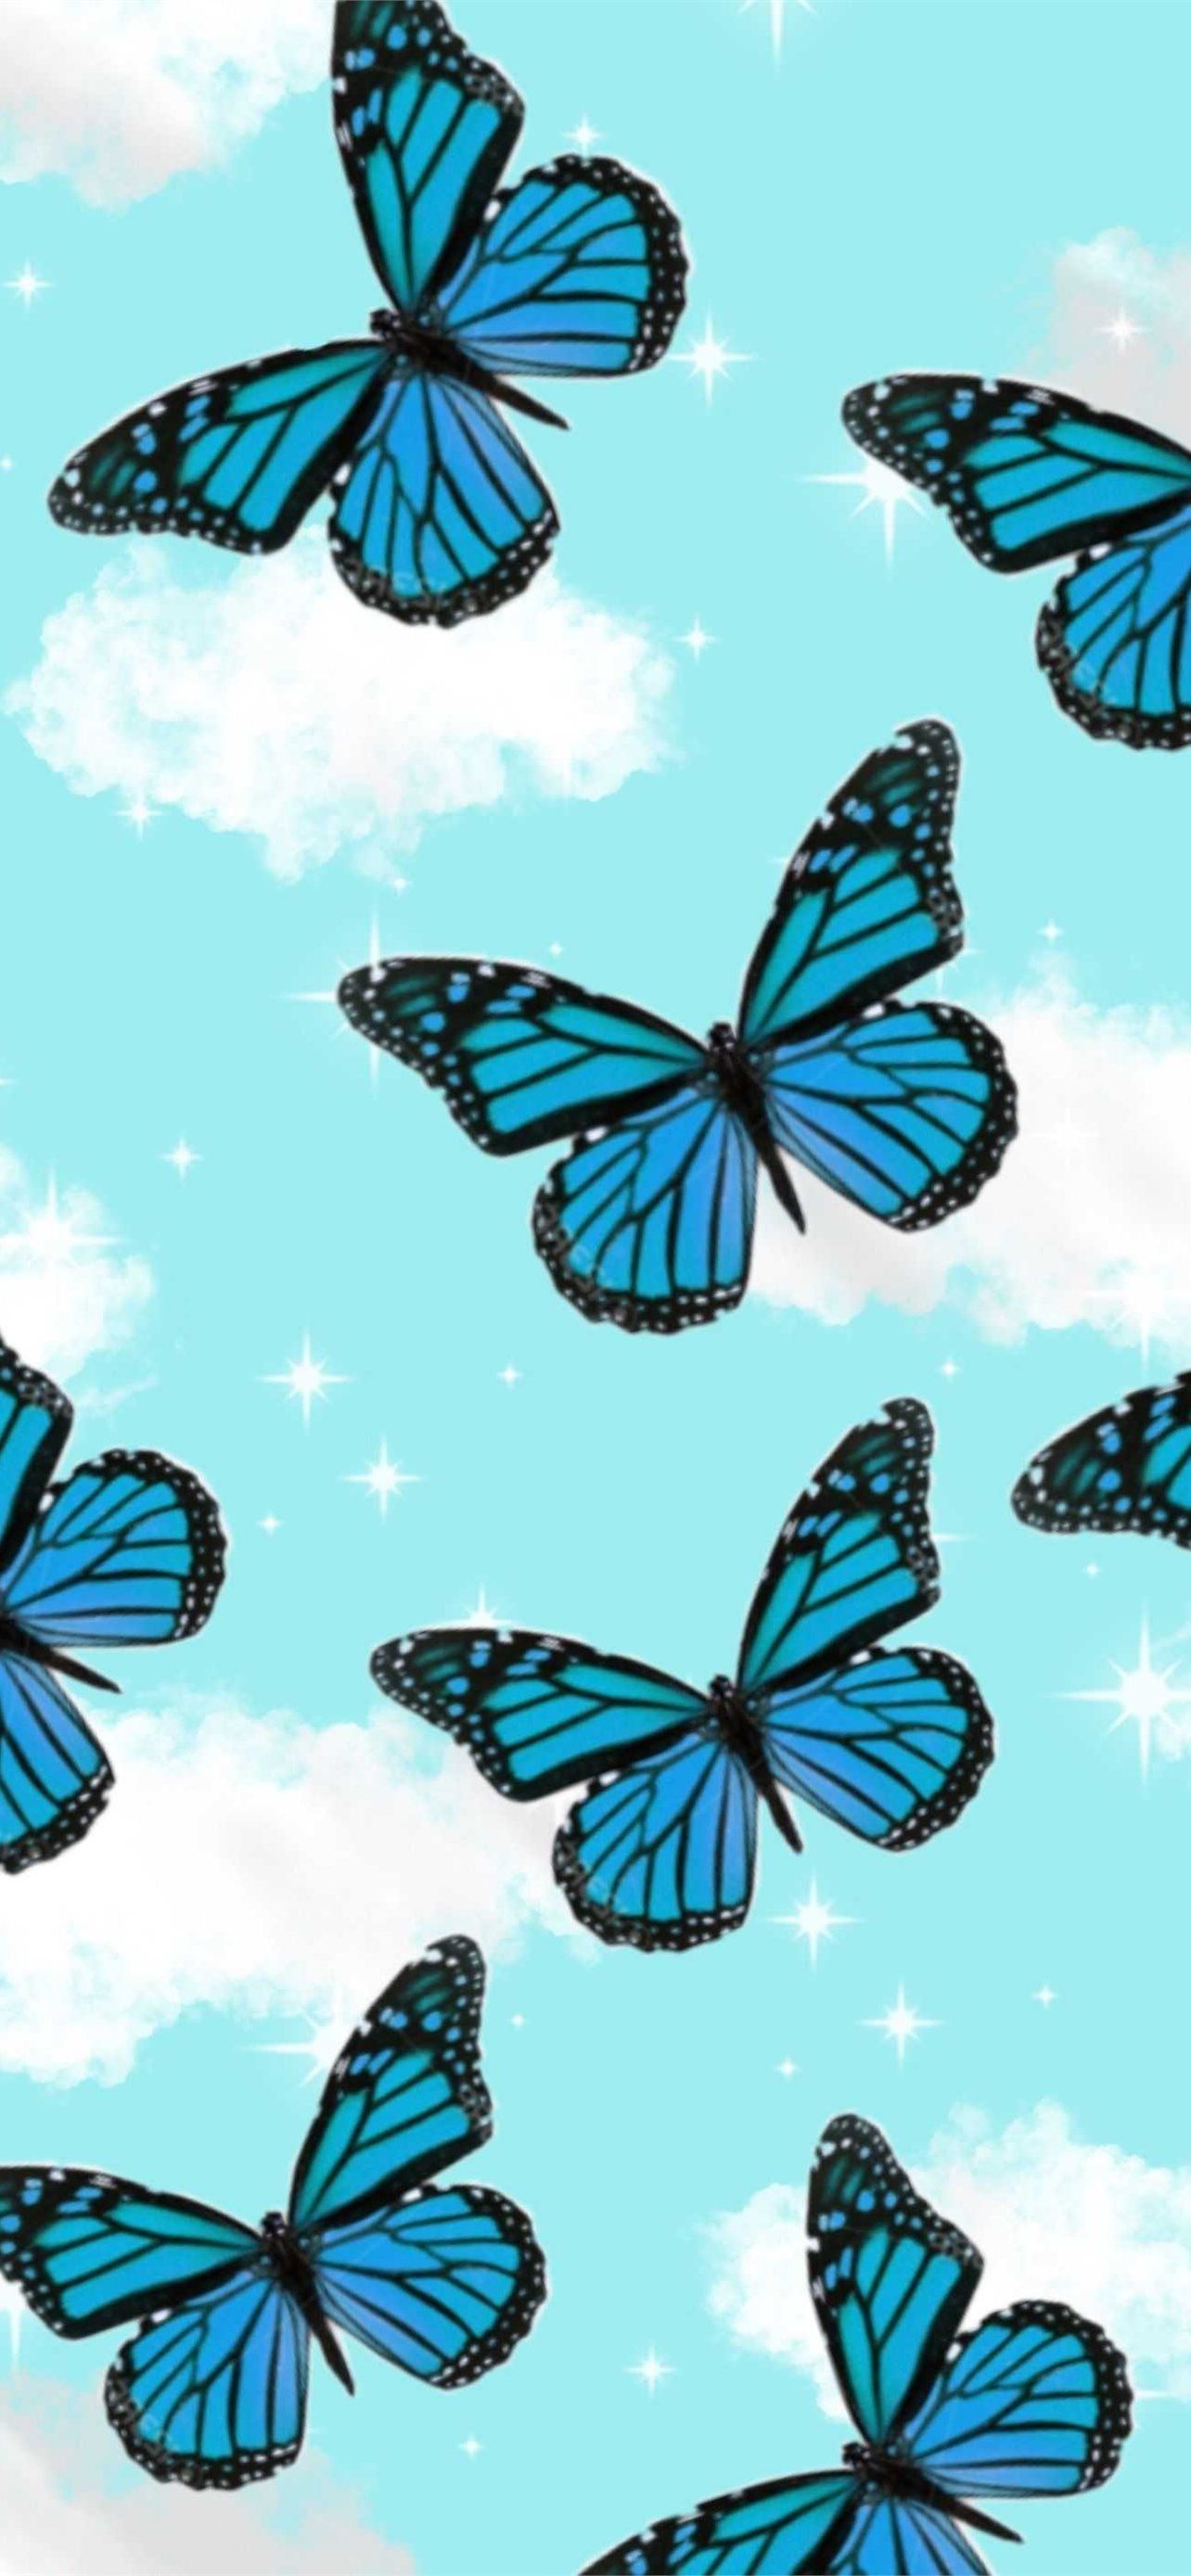 A blue butterfly pattern on top of clouds - Butterfly